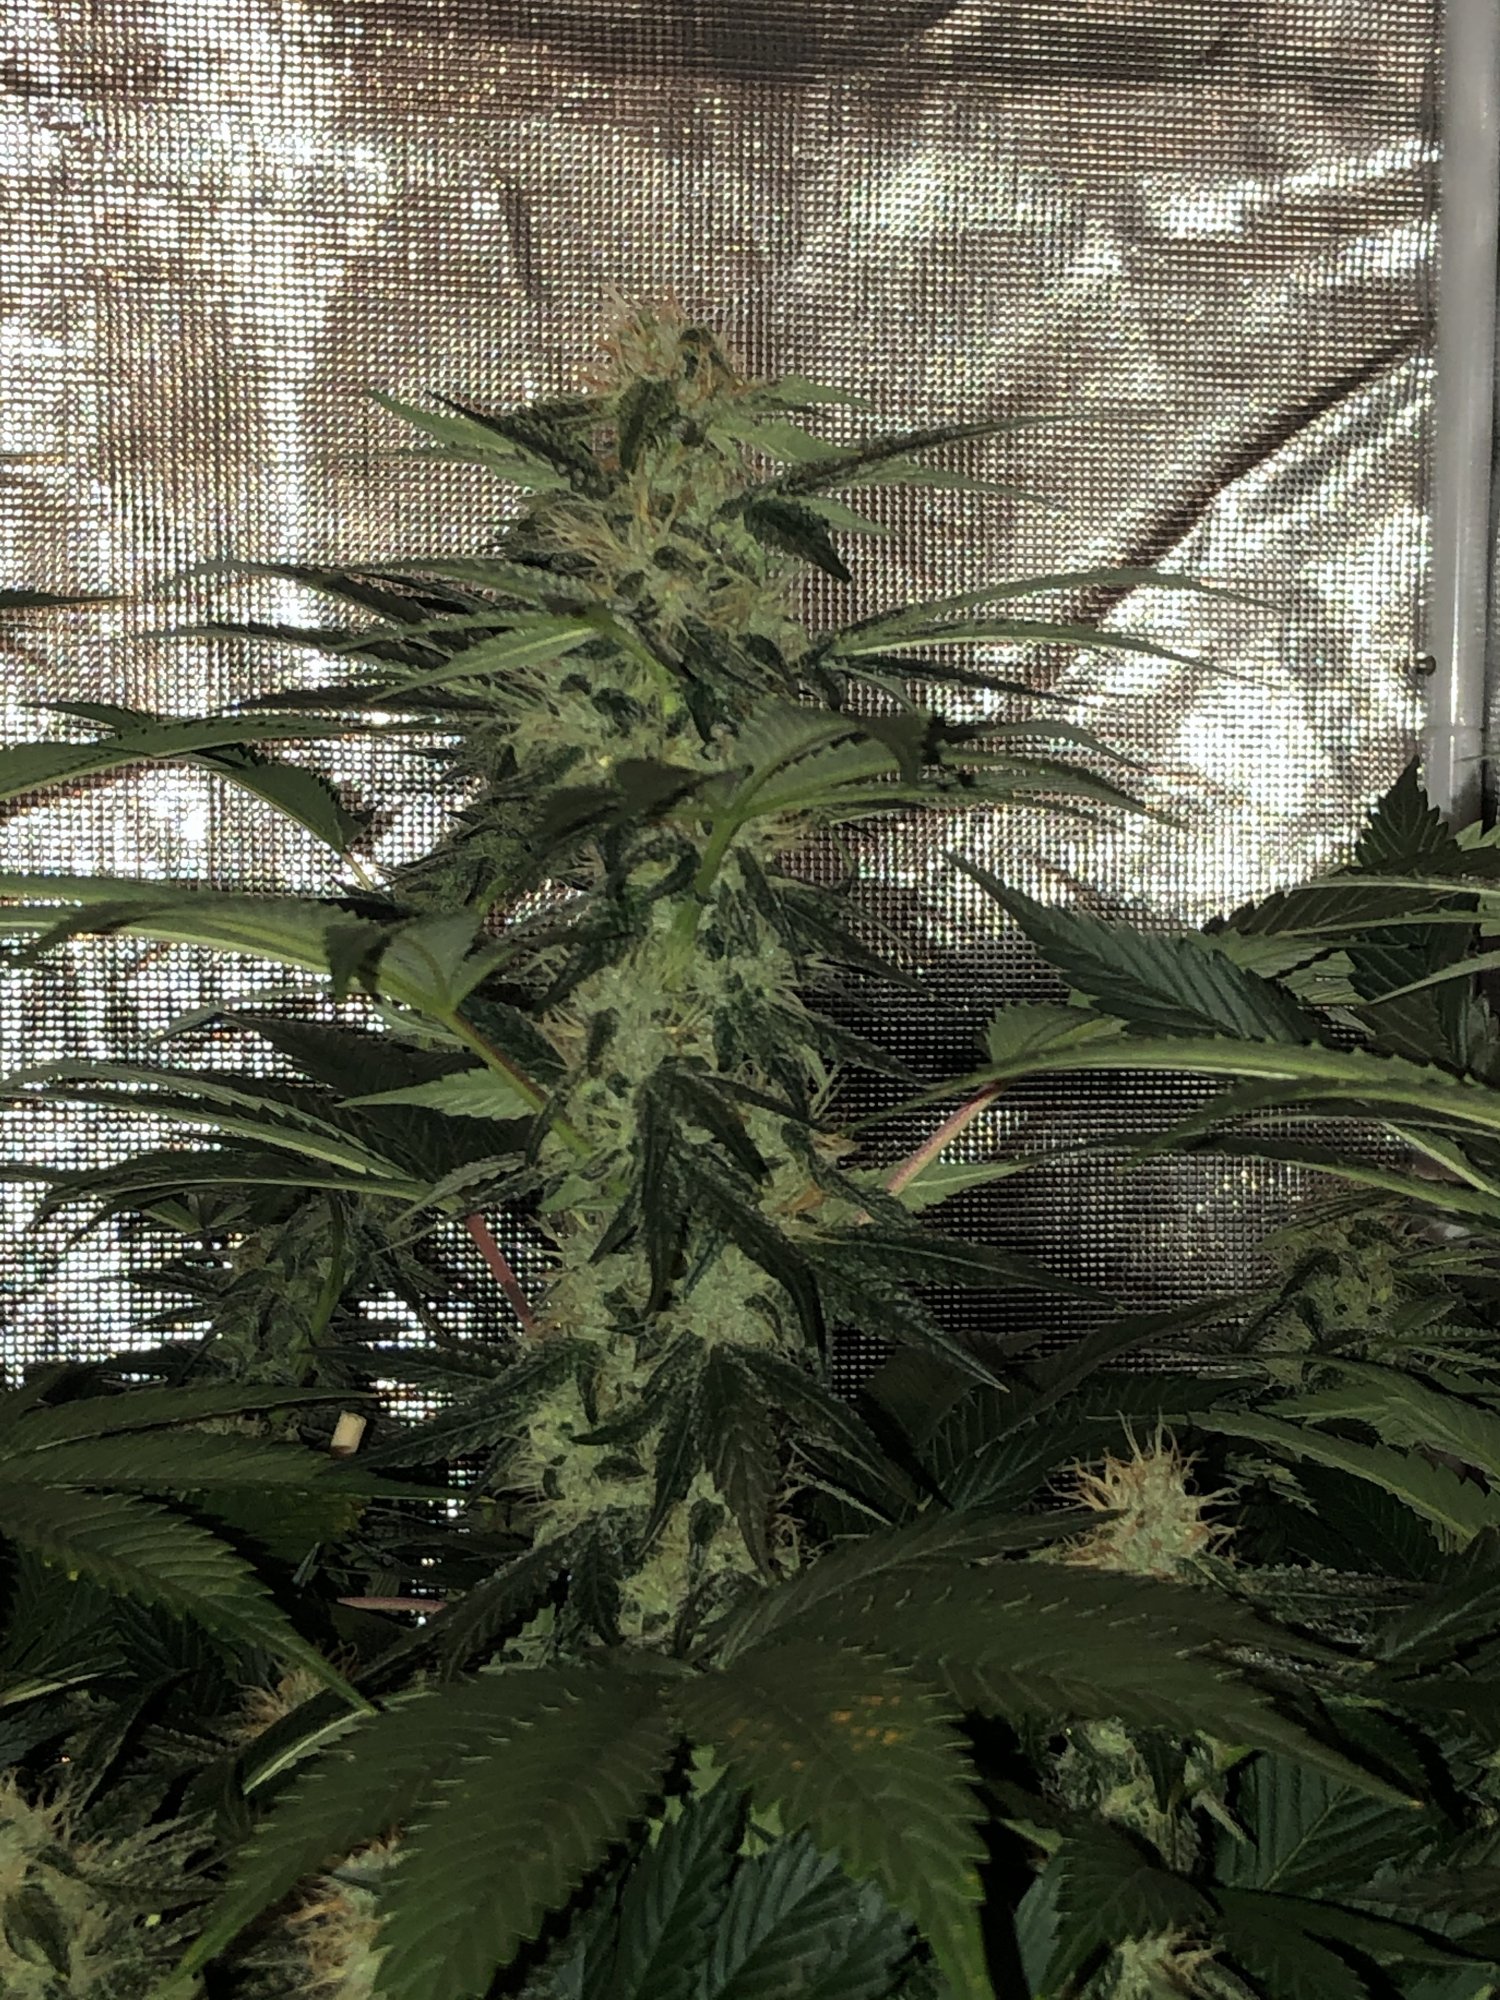 East coast sour diesel grow week 5 of flower   questions for those familiar with this strain 2